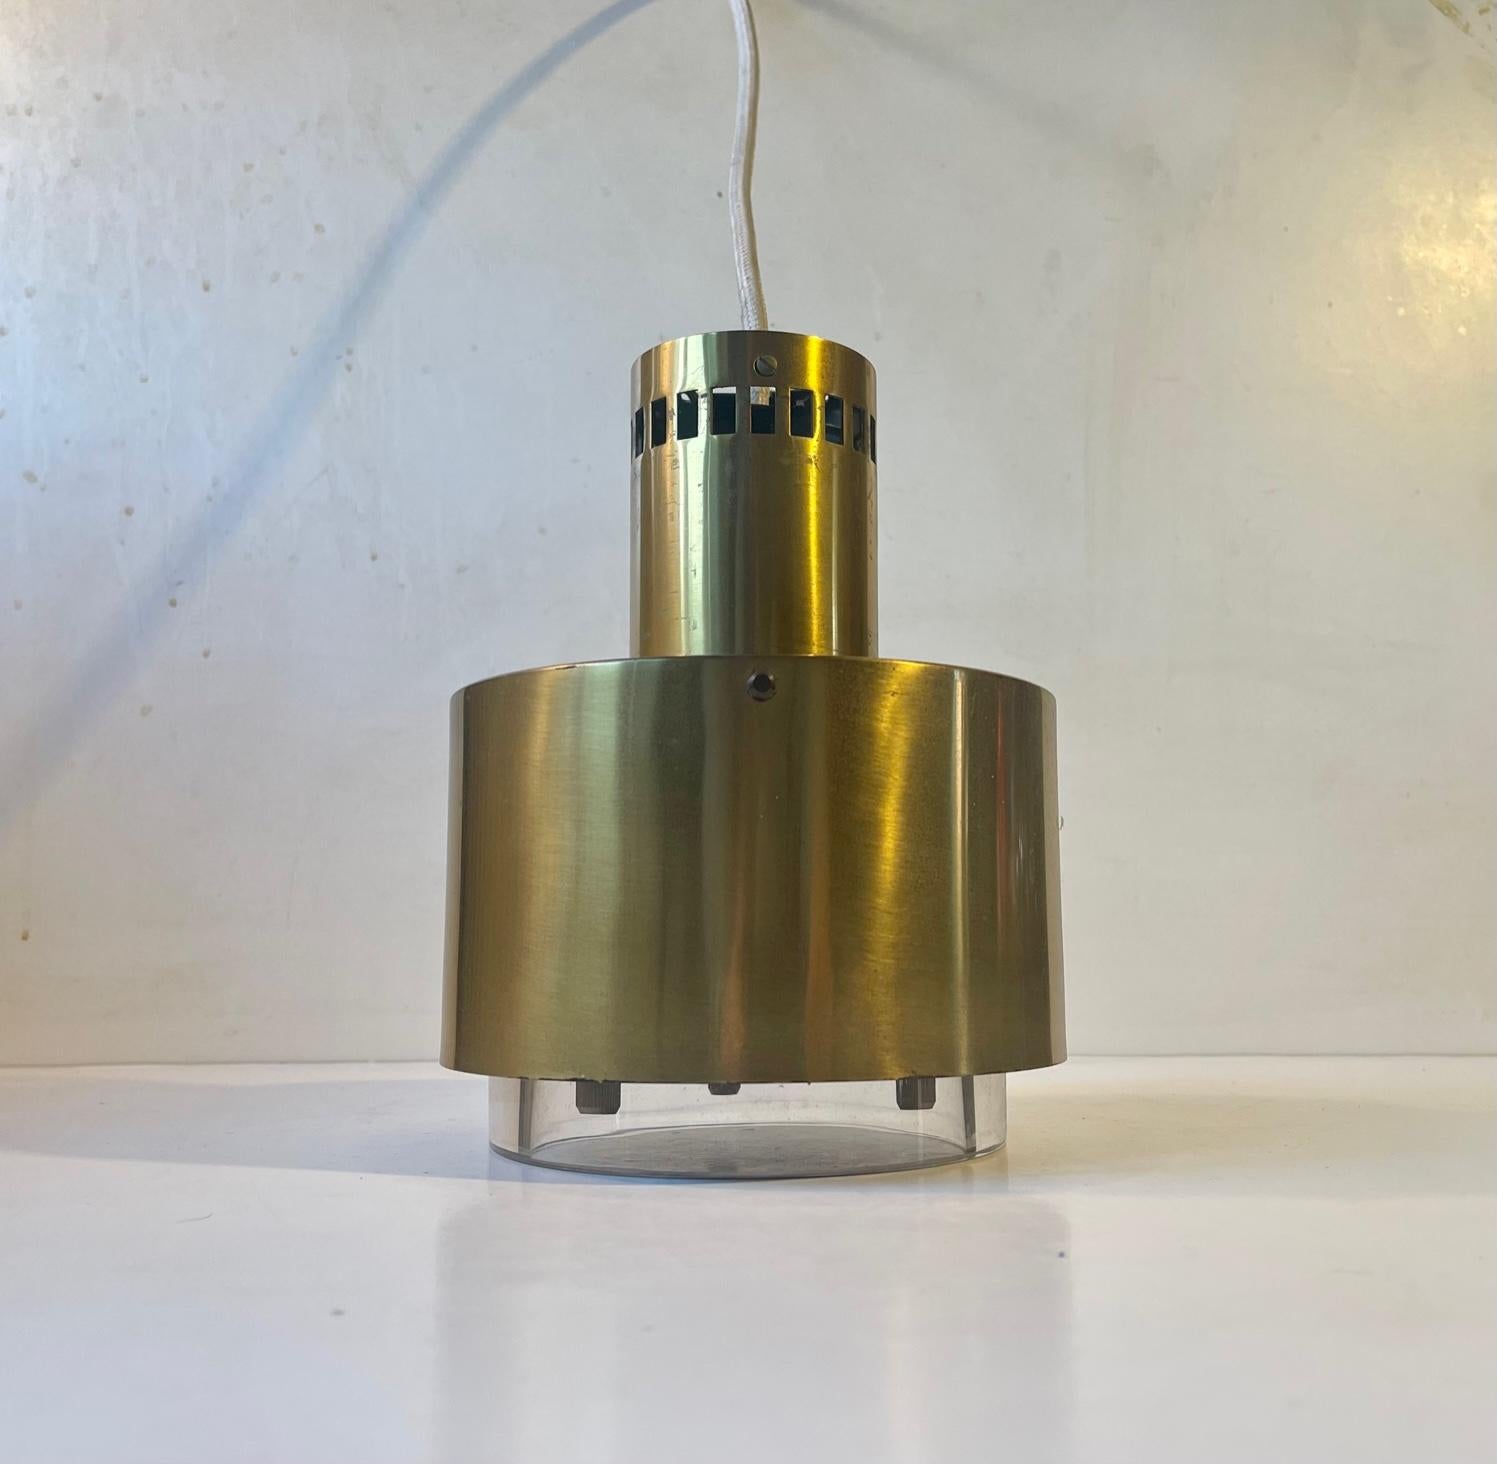 A very rare solid brass and crystal pendant light designed by the danish architect Kay Kørbing in 1967 for the two danish DFDS Ferries/Ships M/S Winston Churchill and M/S Princesse Margrethe. This particular example is the Princess Margrethe version